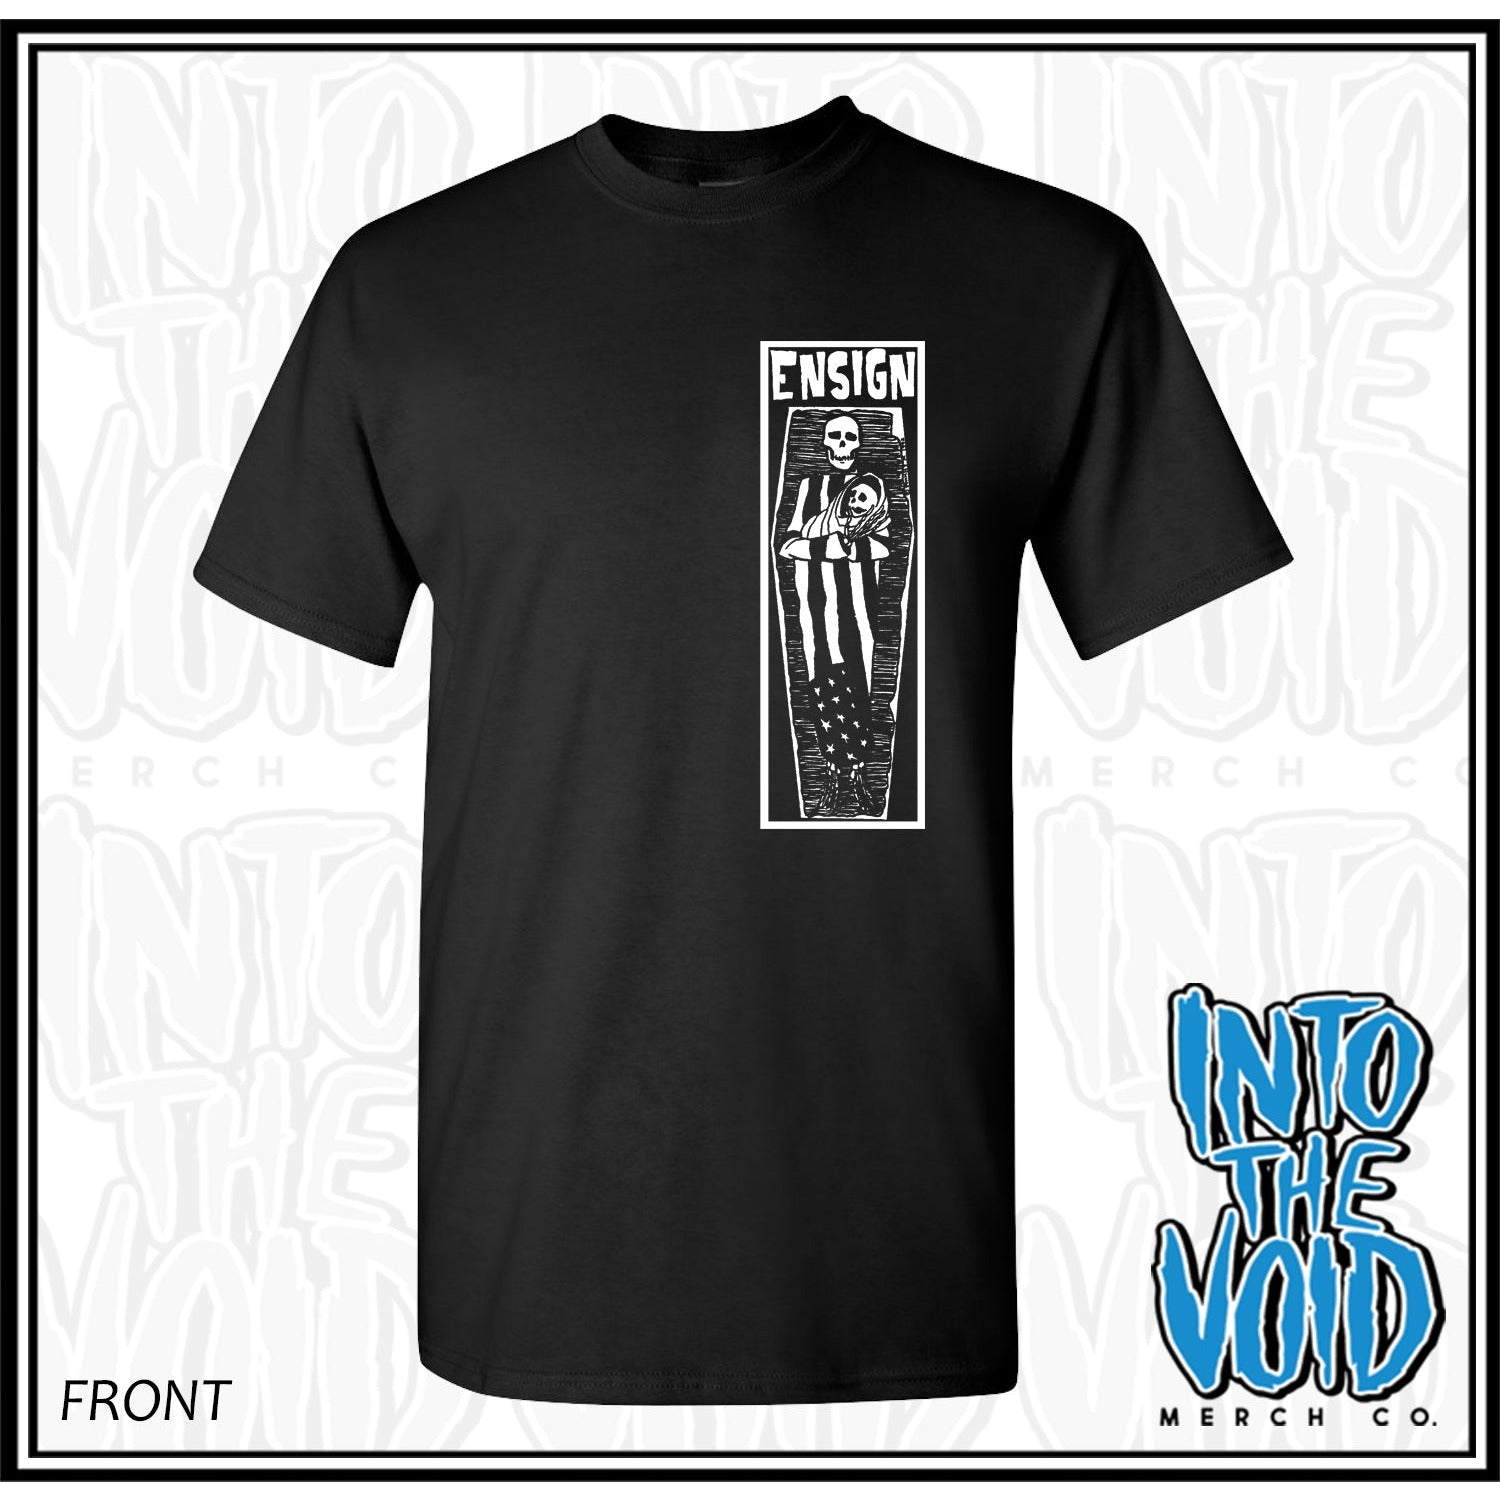 ENSIGN - CASKET - Short Sleeve T-Shirt - INTO THE VOID Merch Co.